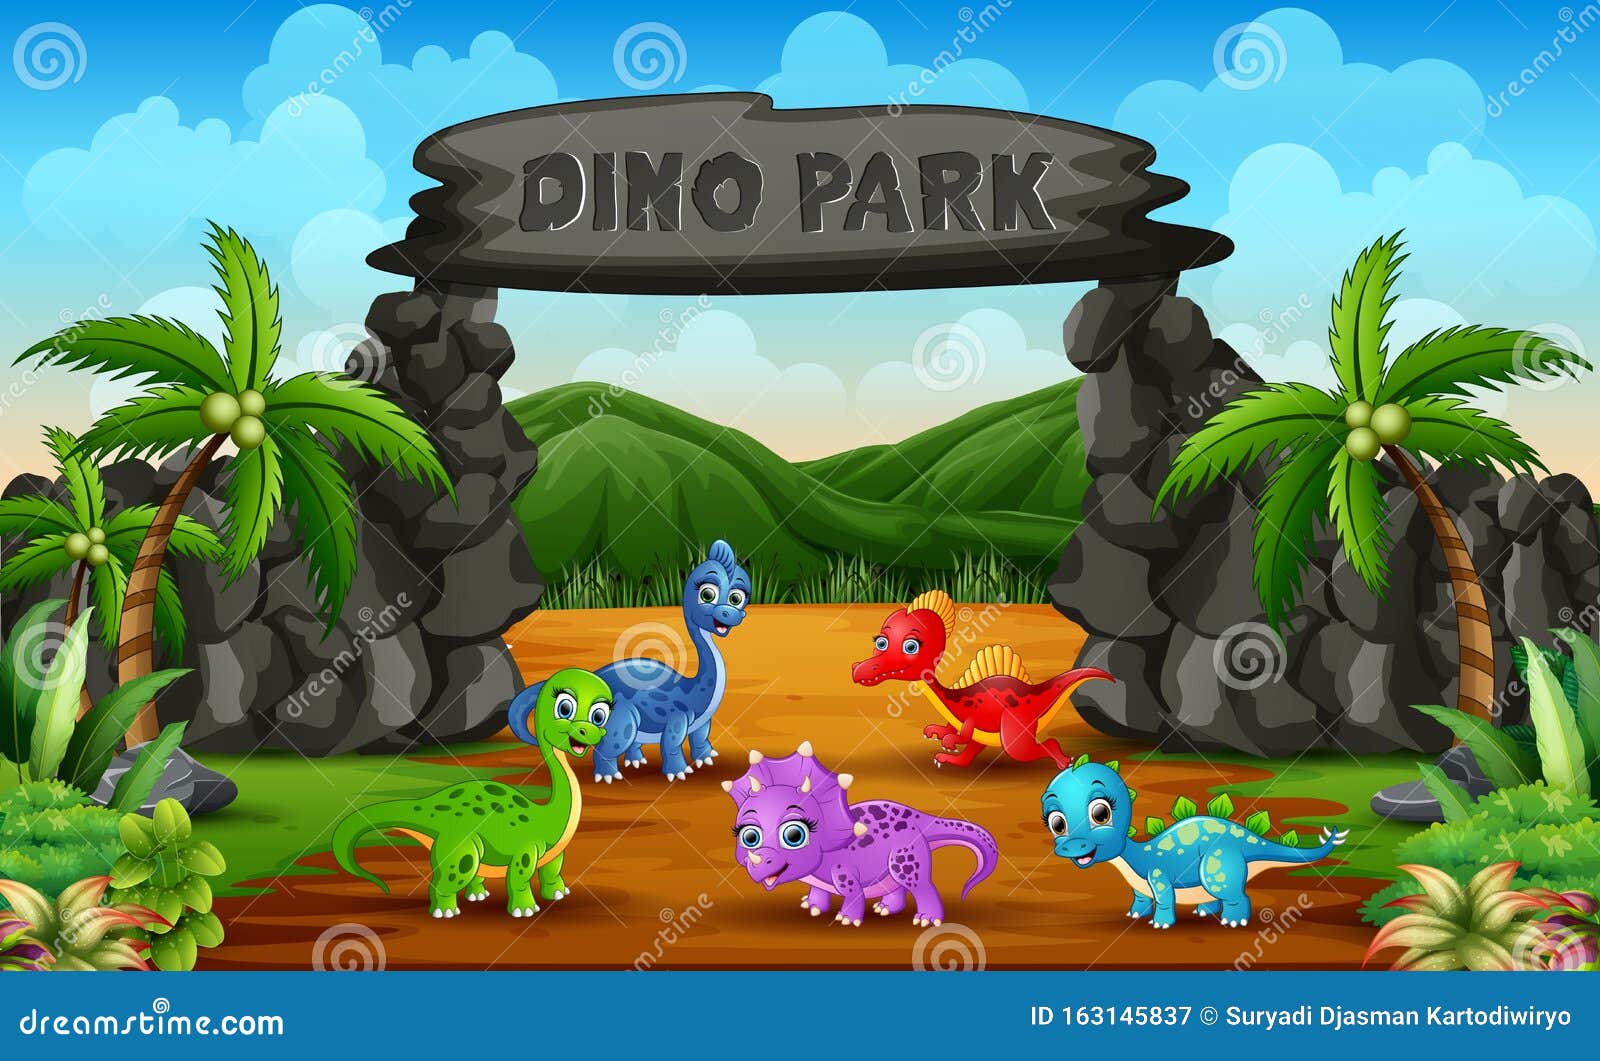 different baby dinosaurs in dino park 